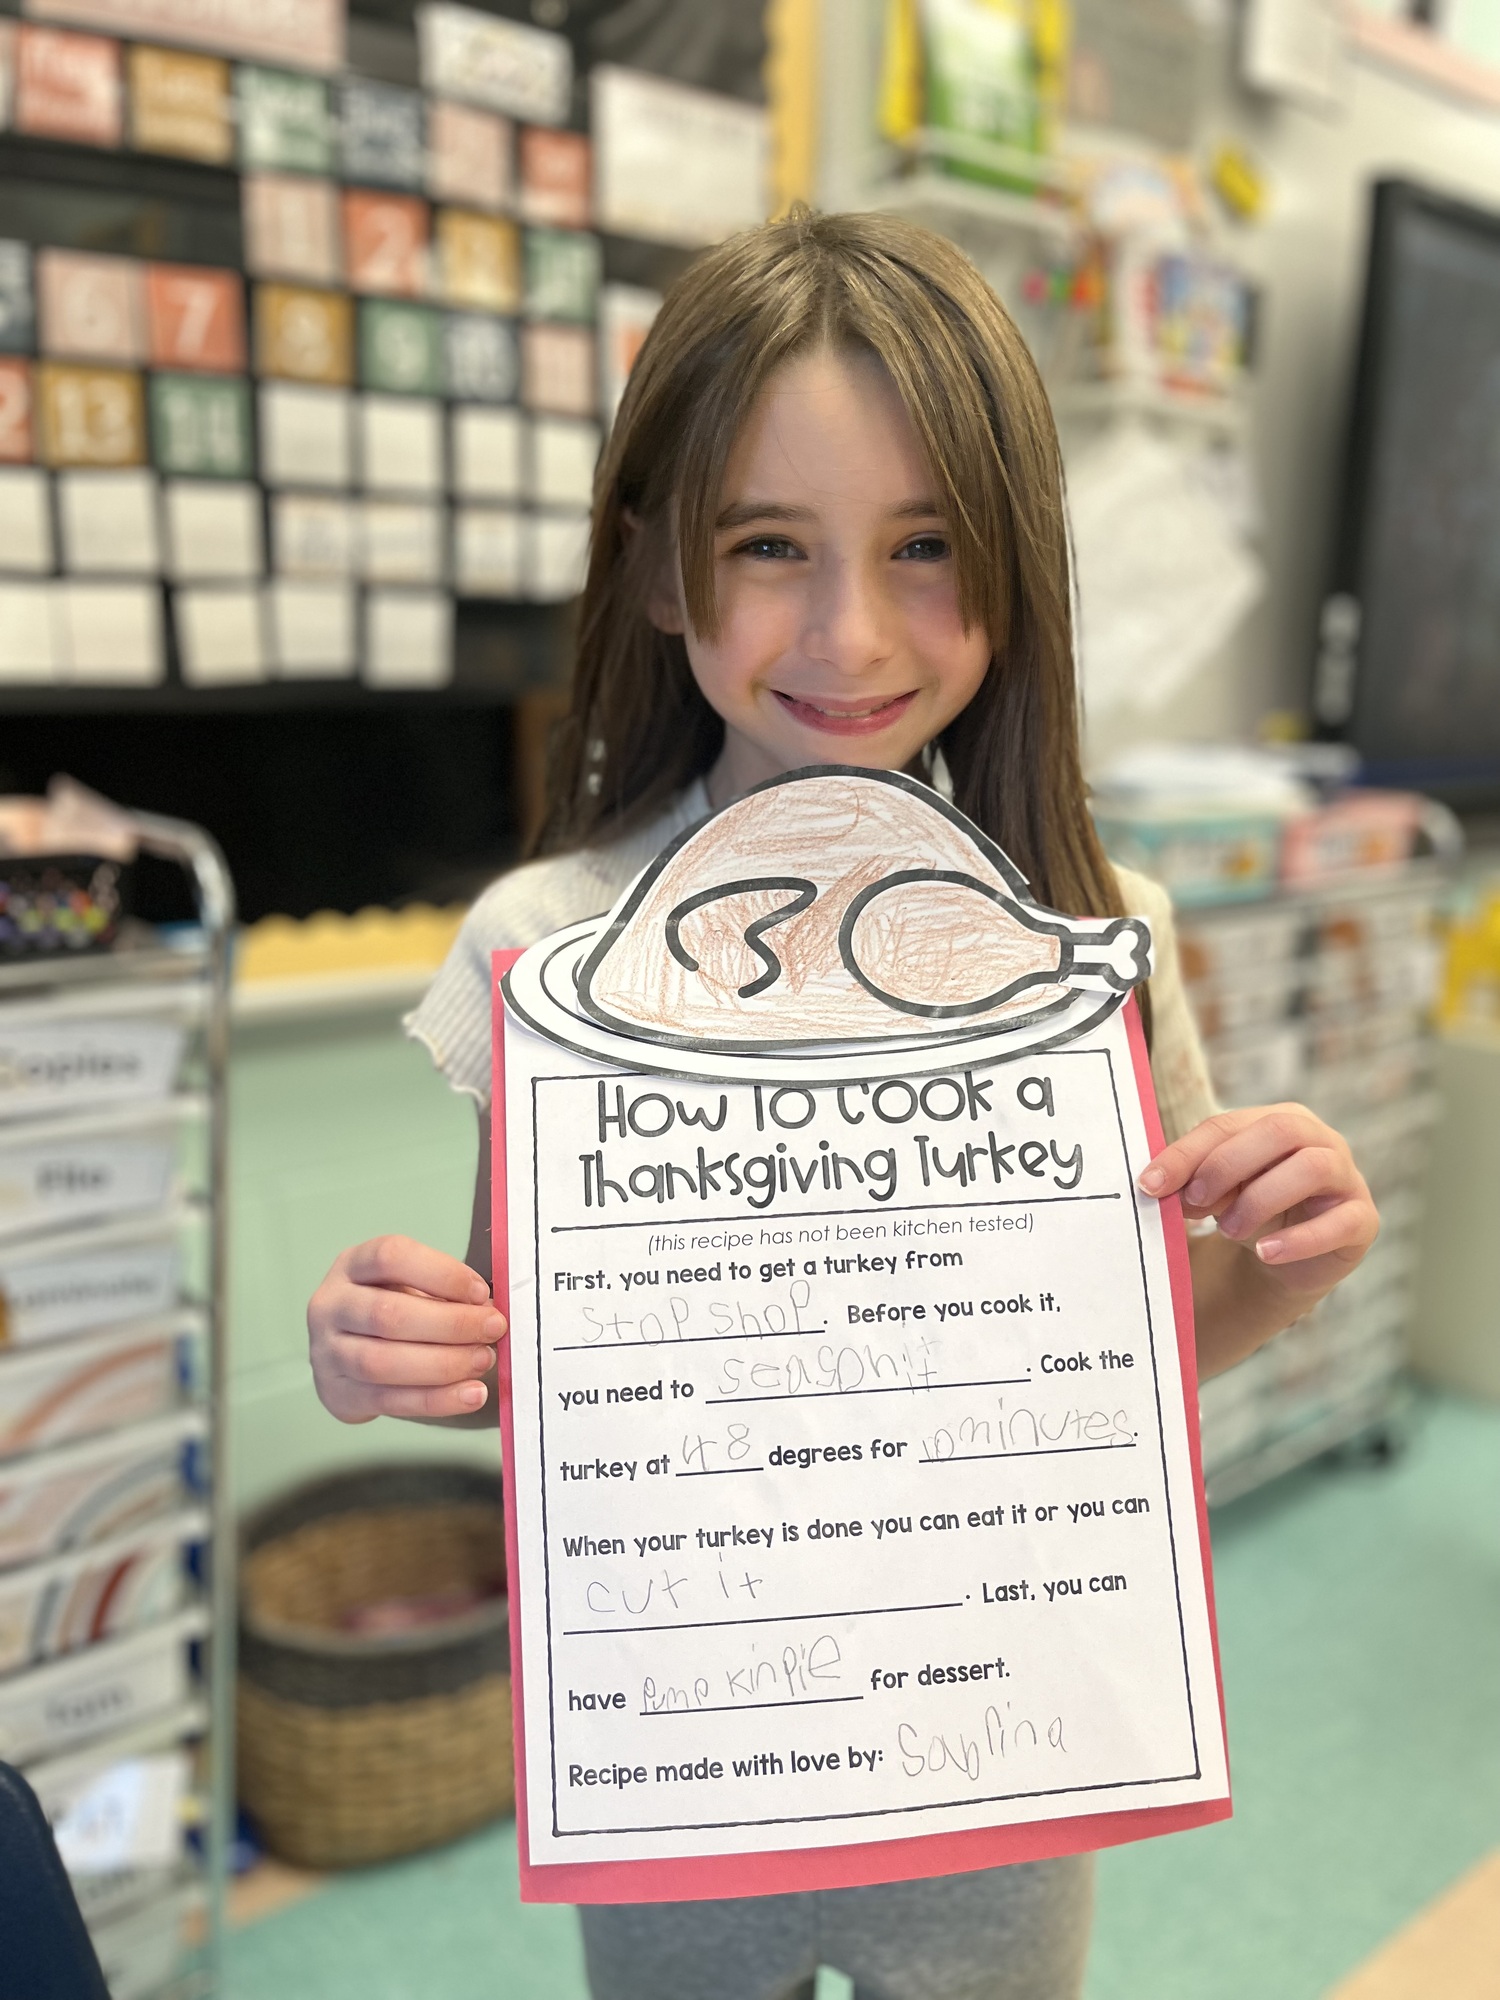 Sabrina Lattanzio, a second-grader in Erin McDermott’s class at Hampton Bays Elementary School is among the students who have been working on skills related to sequencing events and instructional writing pieces. As part of the unit of study, the students created their own turkey recipe and discussed the steps needed to create the perfect Thanksgiving bird. “Students really enjoyed creating their own silly yet delicious recipes,” said McDermott. COURTESY HAMPTON BAYS SCHOOL DISTRICT